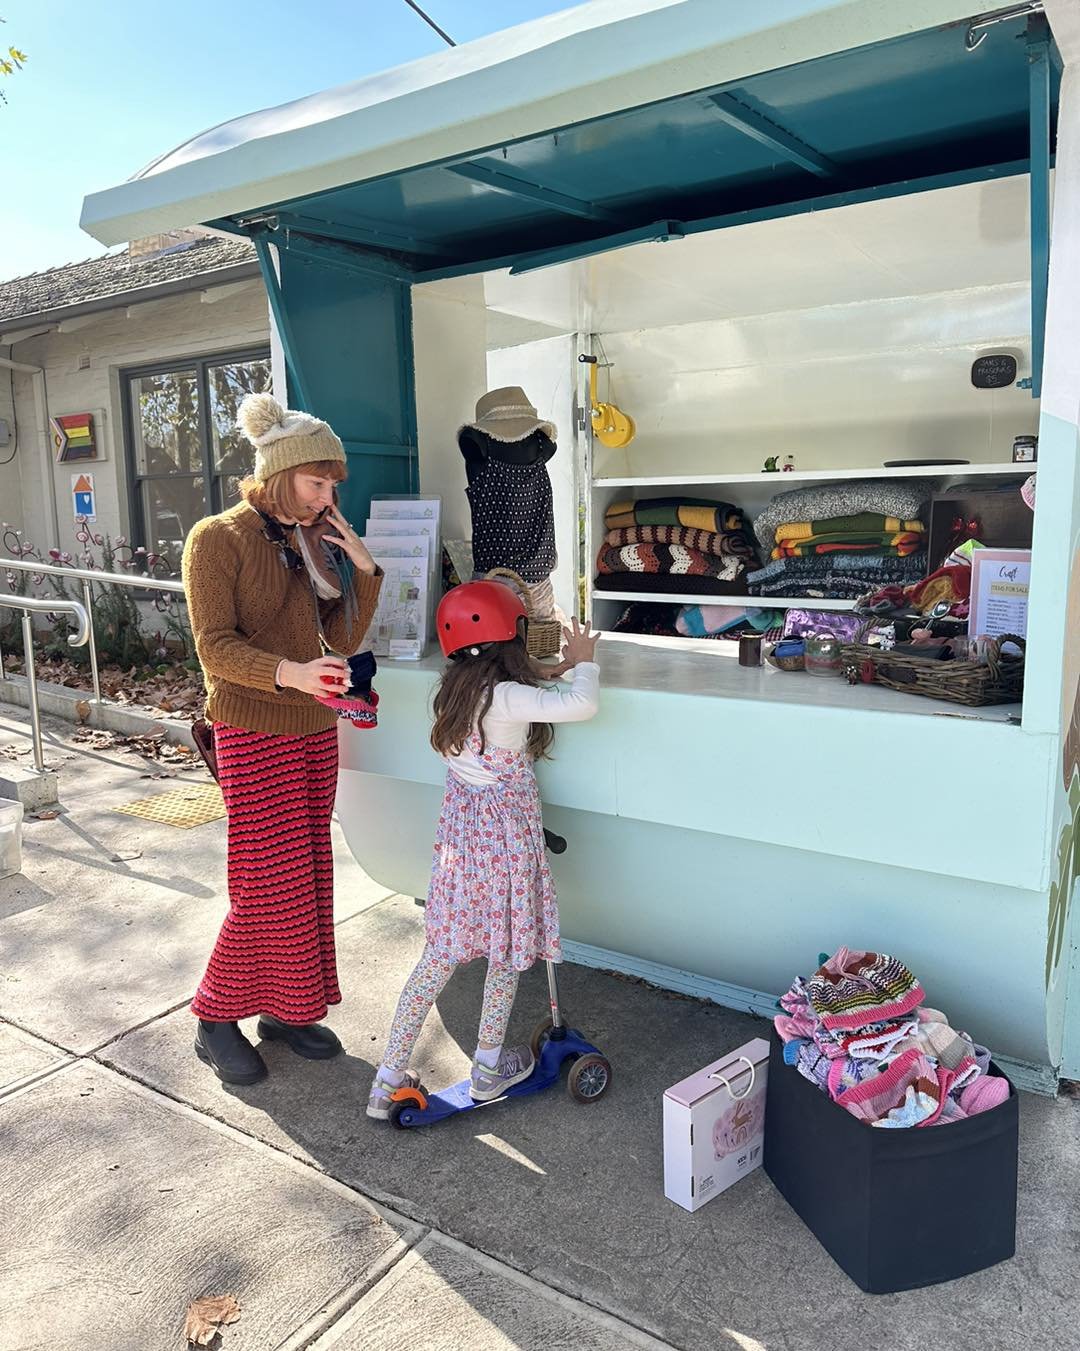 The kiosk was open today &hellip; currently hosting our op shop! Pop past on Mondays and Thursdays to check it out #thekiosk #miniopshop #community #neighbourhoodhousesvictoria